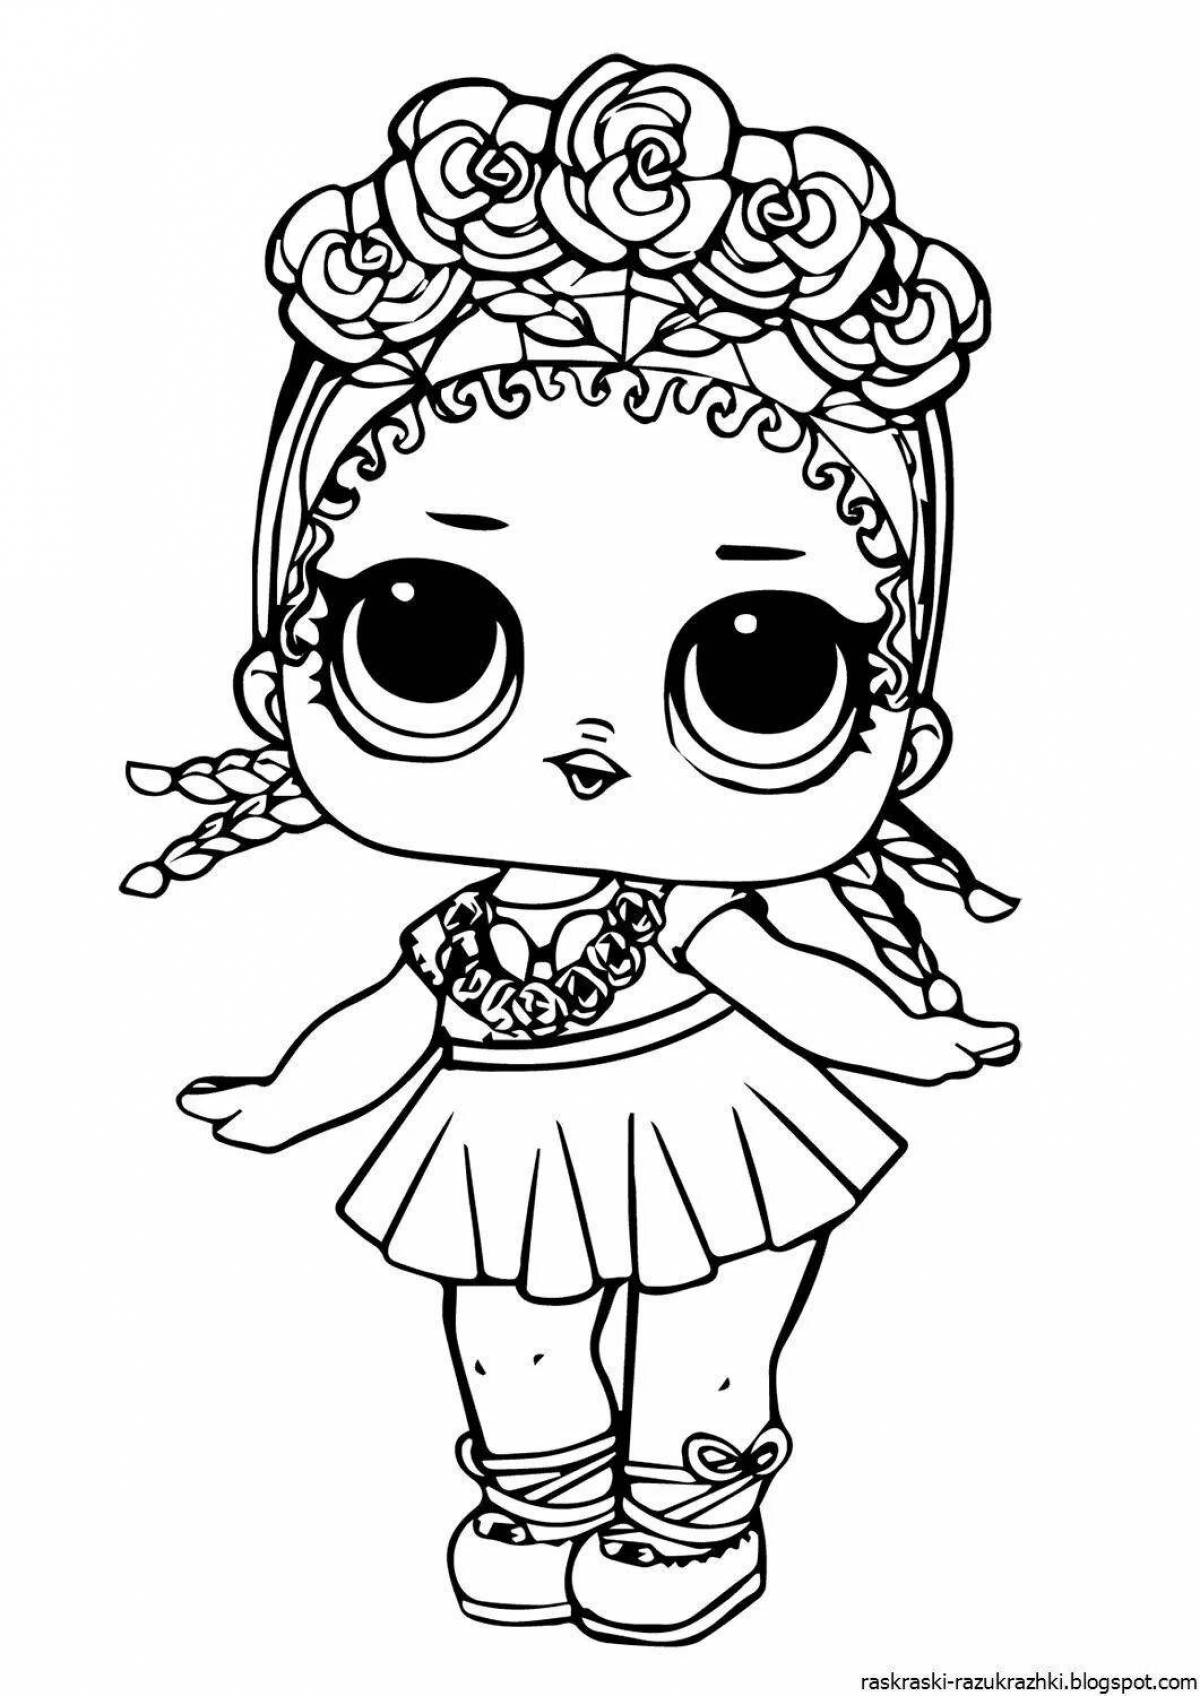 Exquisite lola doll coloring book for kids